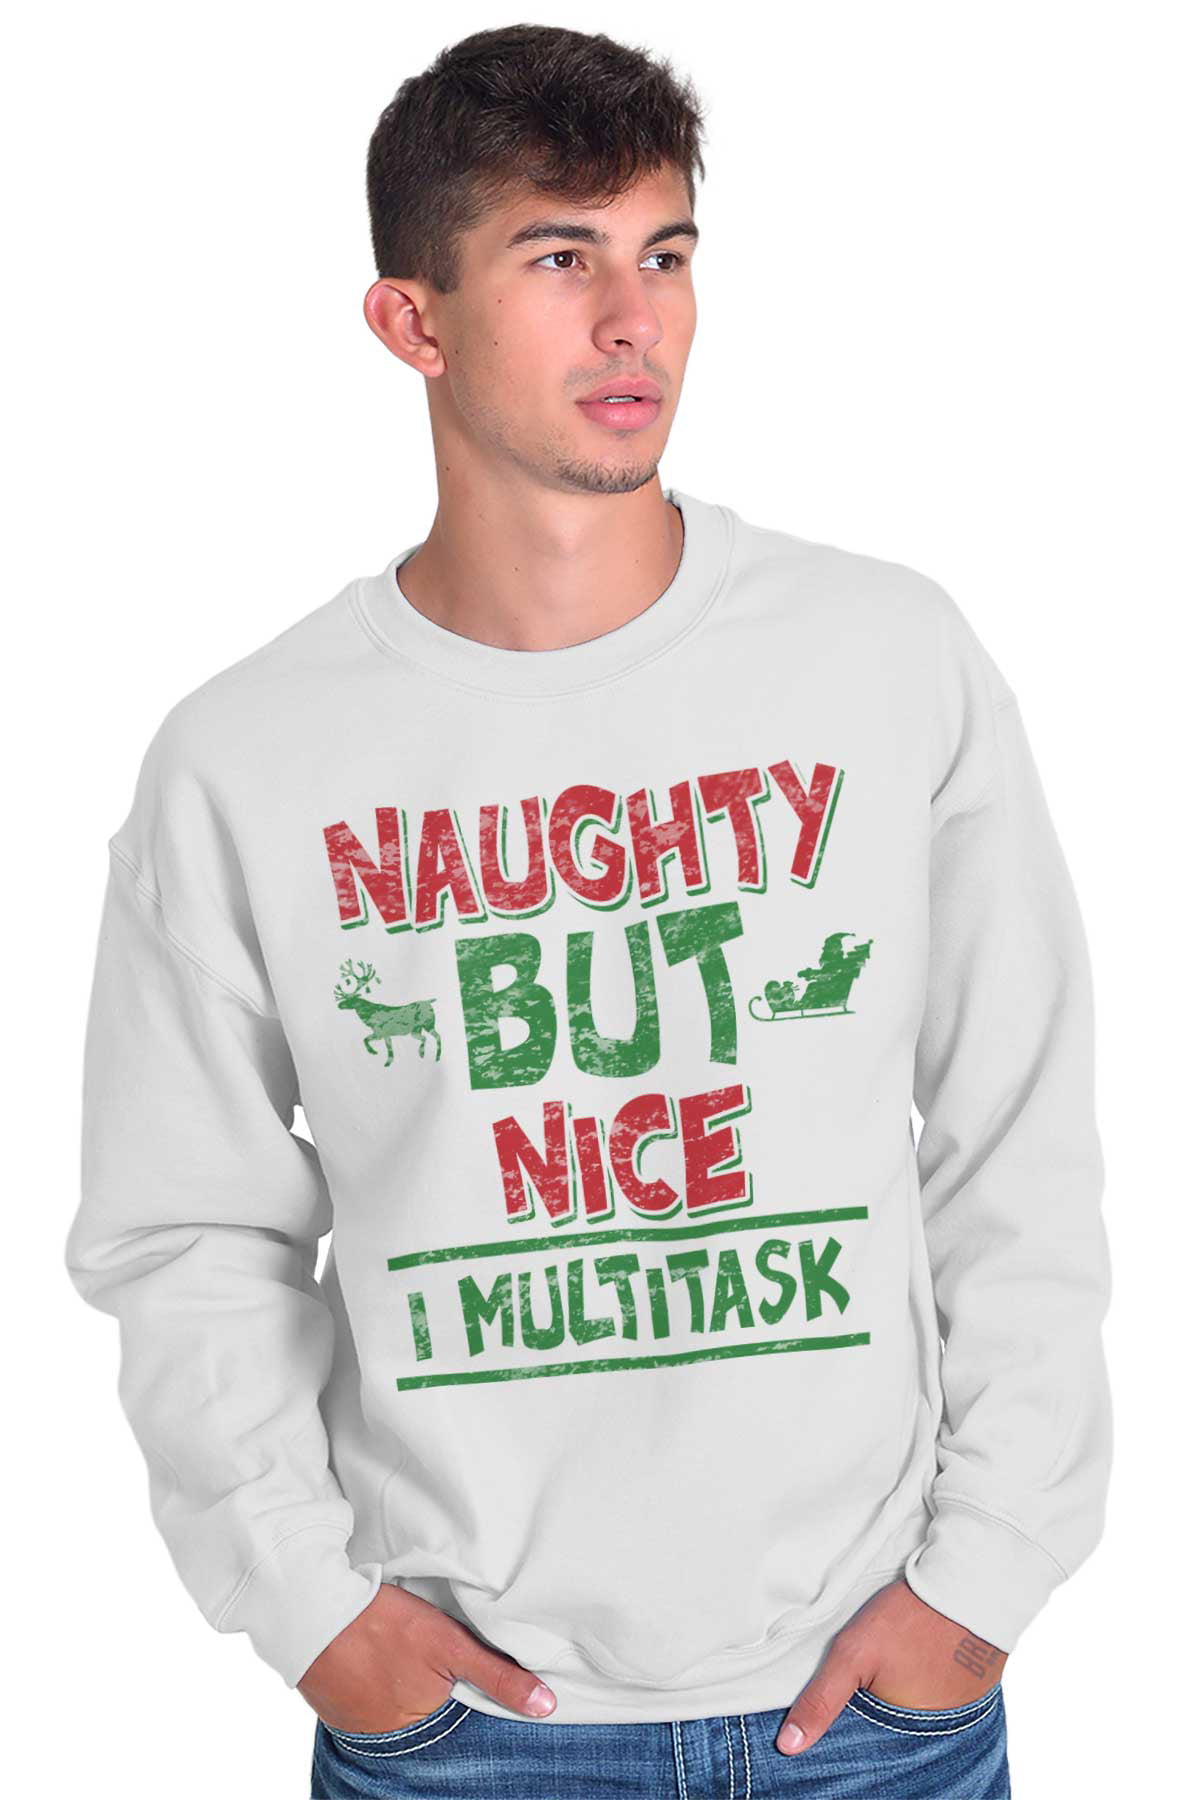 Naughty But Nice I Multitask Jumper Funny Christmas Xmas Day Ugly Unisex Top 